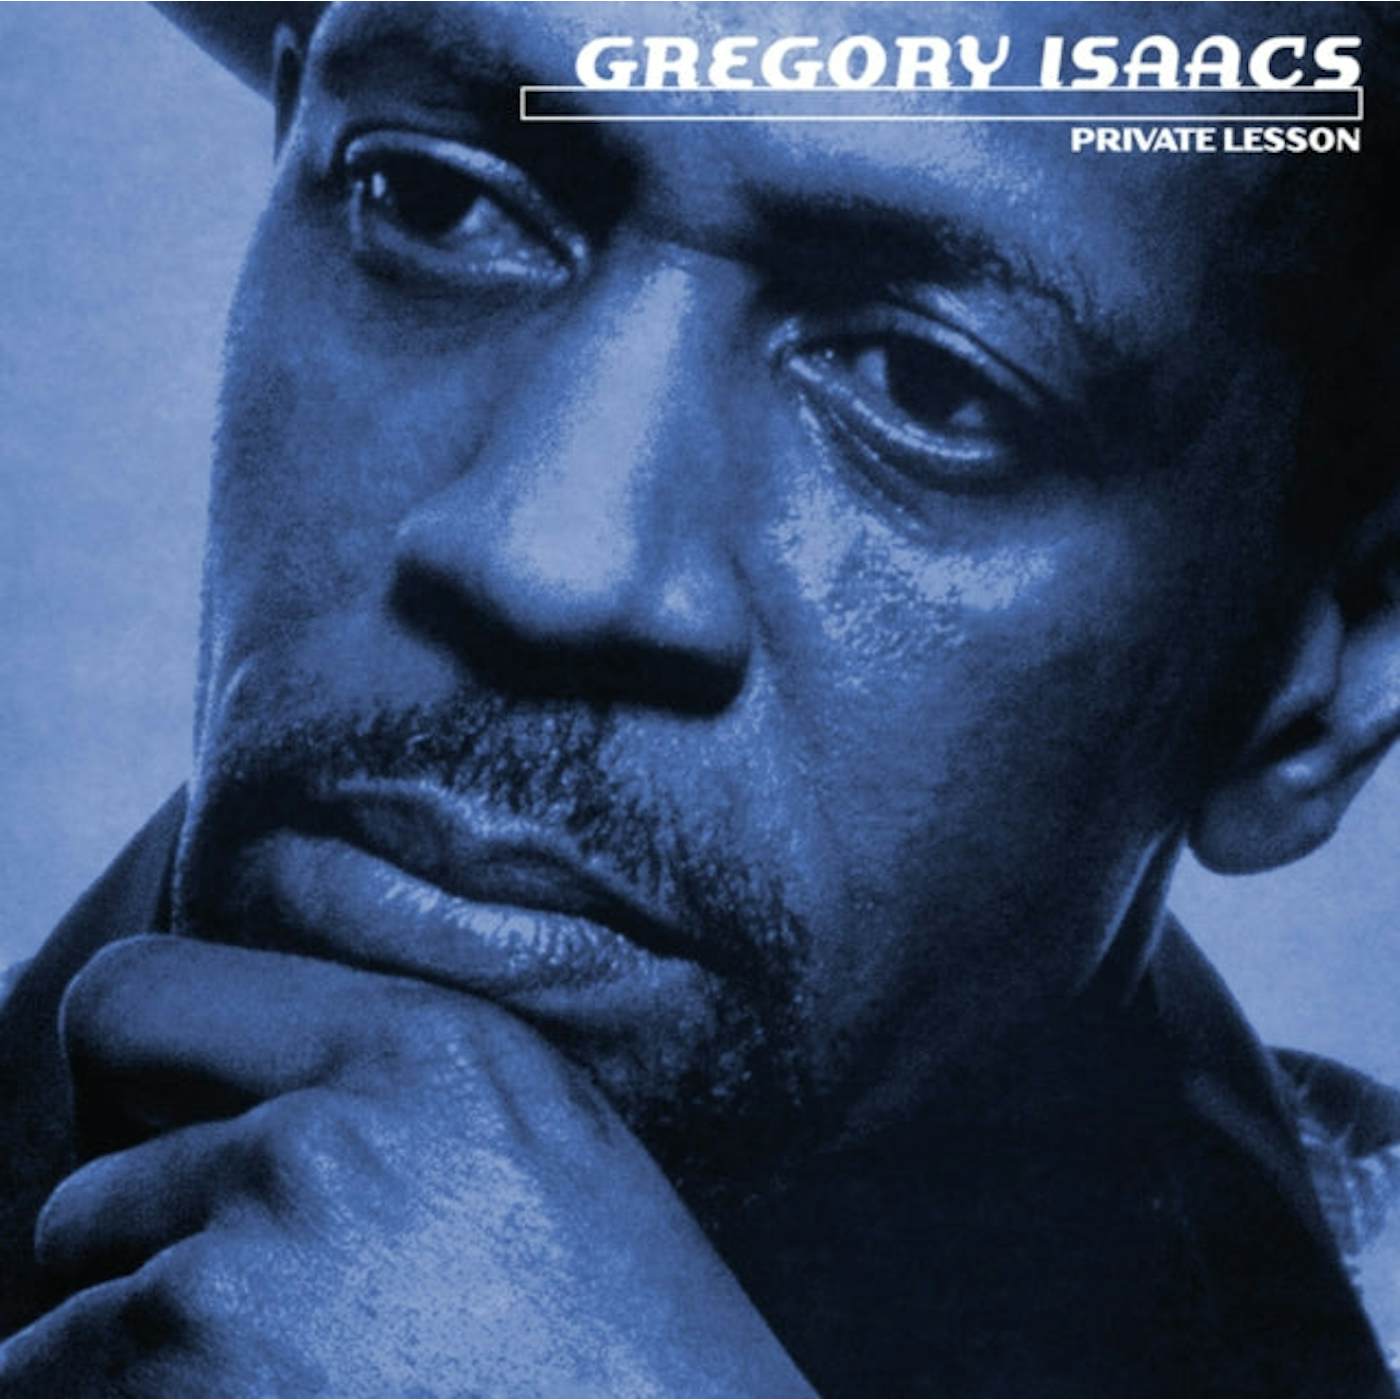 Gregory Isaacs LP Vinyl Record - Private Lesson